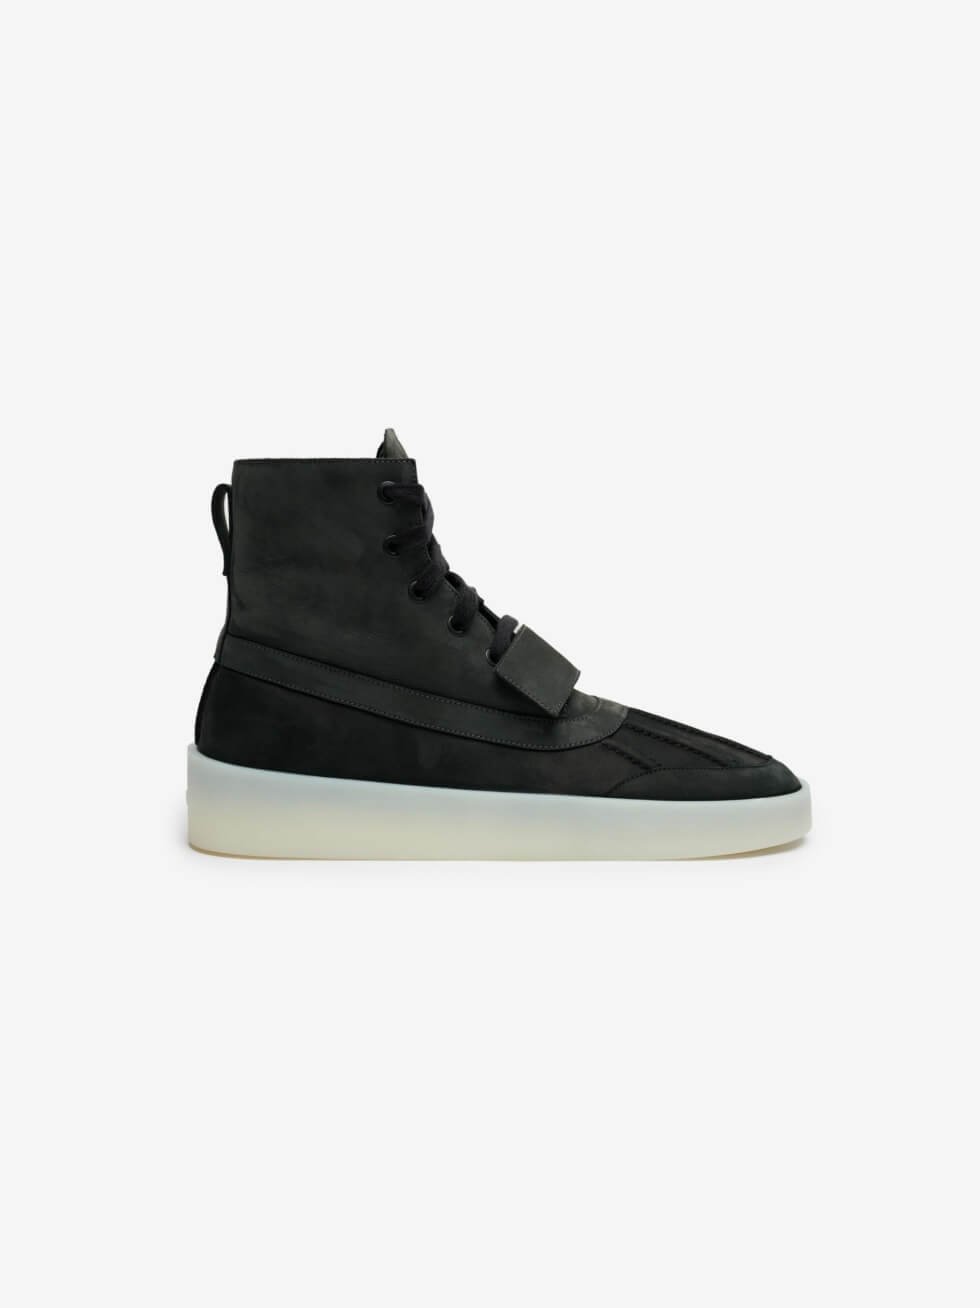 Style Up For The Colder Season With The Fear of God DuckBoot